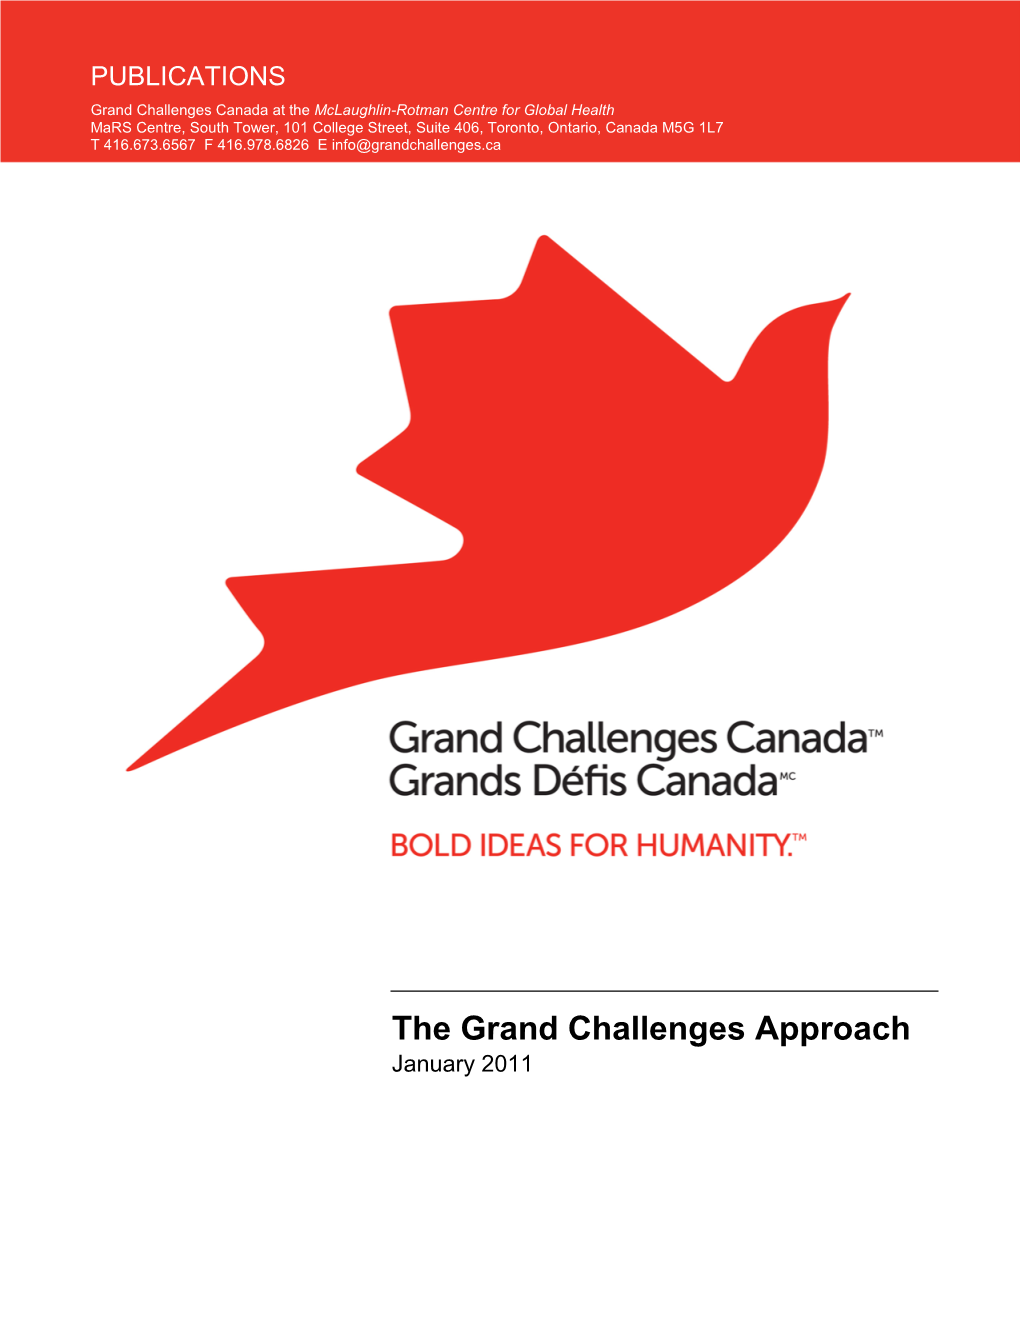 The Grand Challenges Approach January 2011